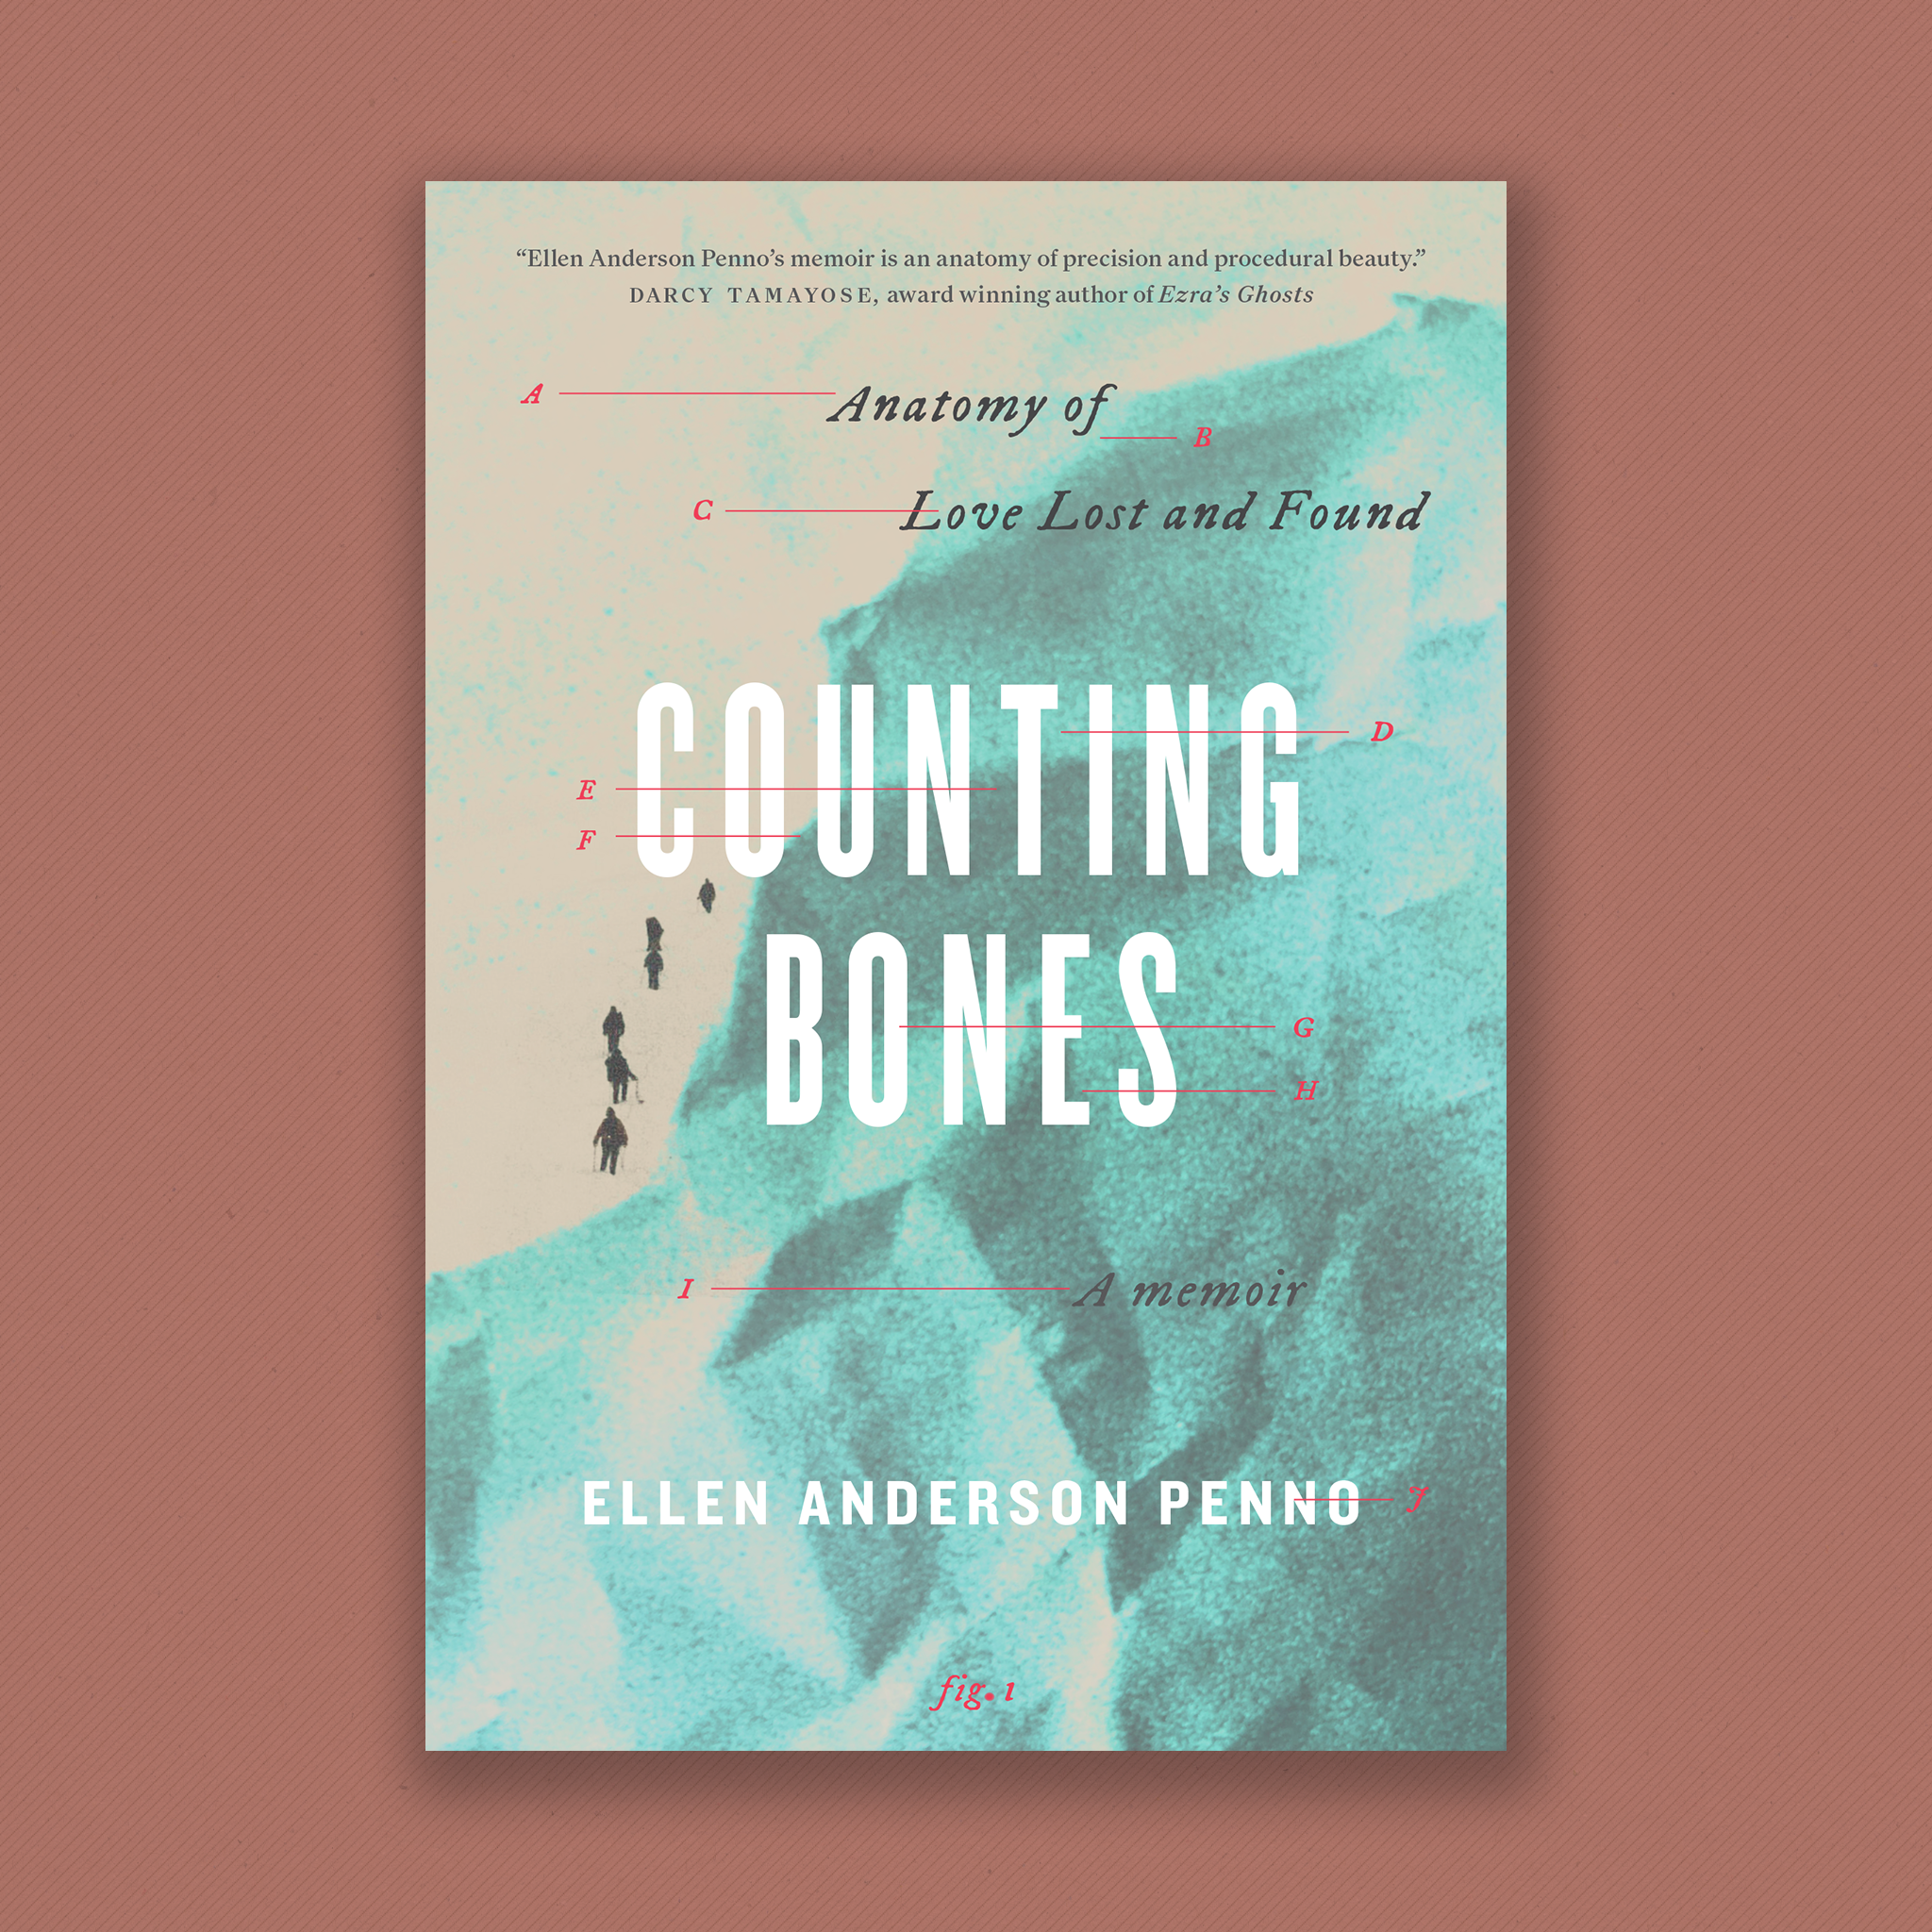 Book Cover: Counting Bones, Anatomy of Love Lost and Found, a memoir by Ellen Anderson Penno Cover: Small climbers make their way up a massive blue mountain. The mountain is abstractly drawn. The title and subtitle are labeled by thin red lines with attached letters similar to a medical text book. The entire cover is labeled as fig 1. 